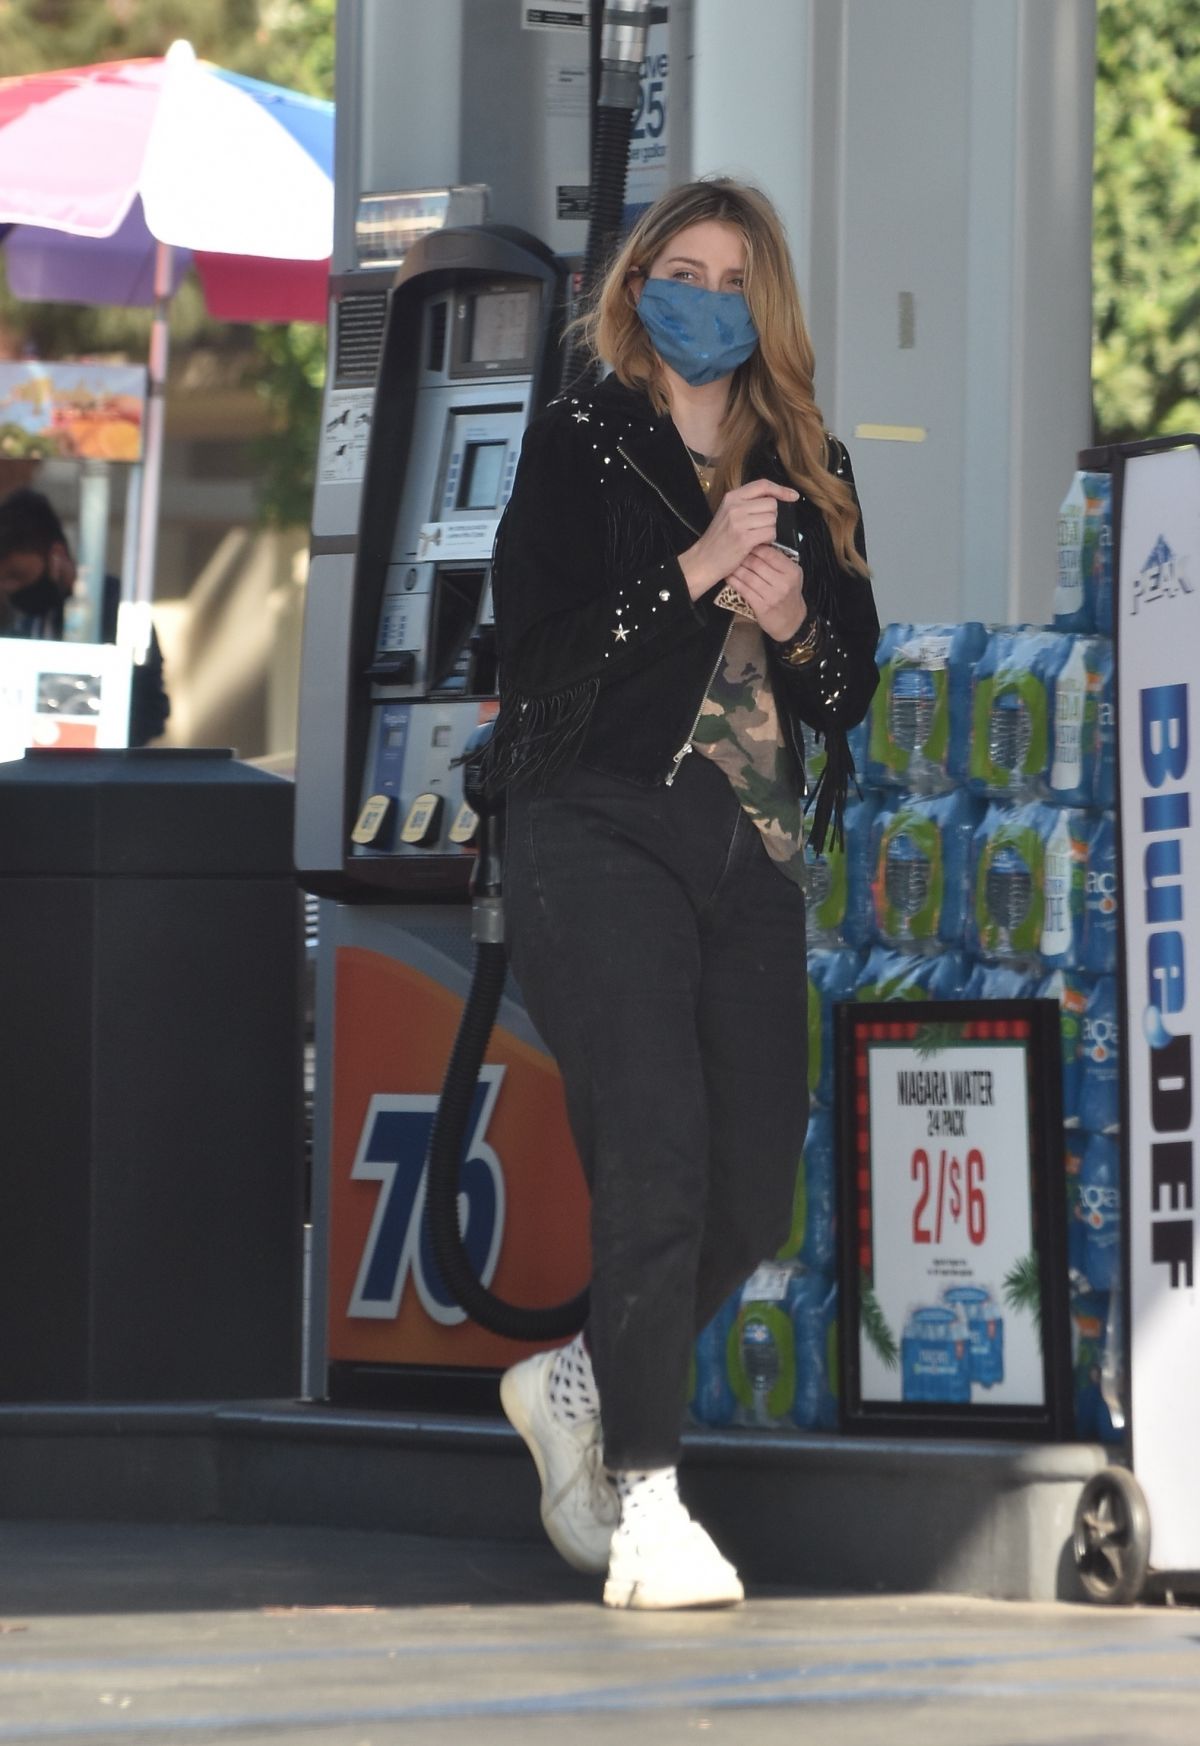 mischa-barton-at-a-gas-station-in-los-angeles-12-10-2020-0.jpg